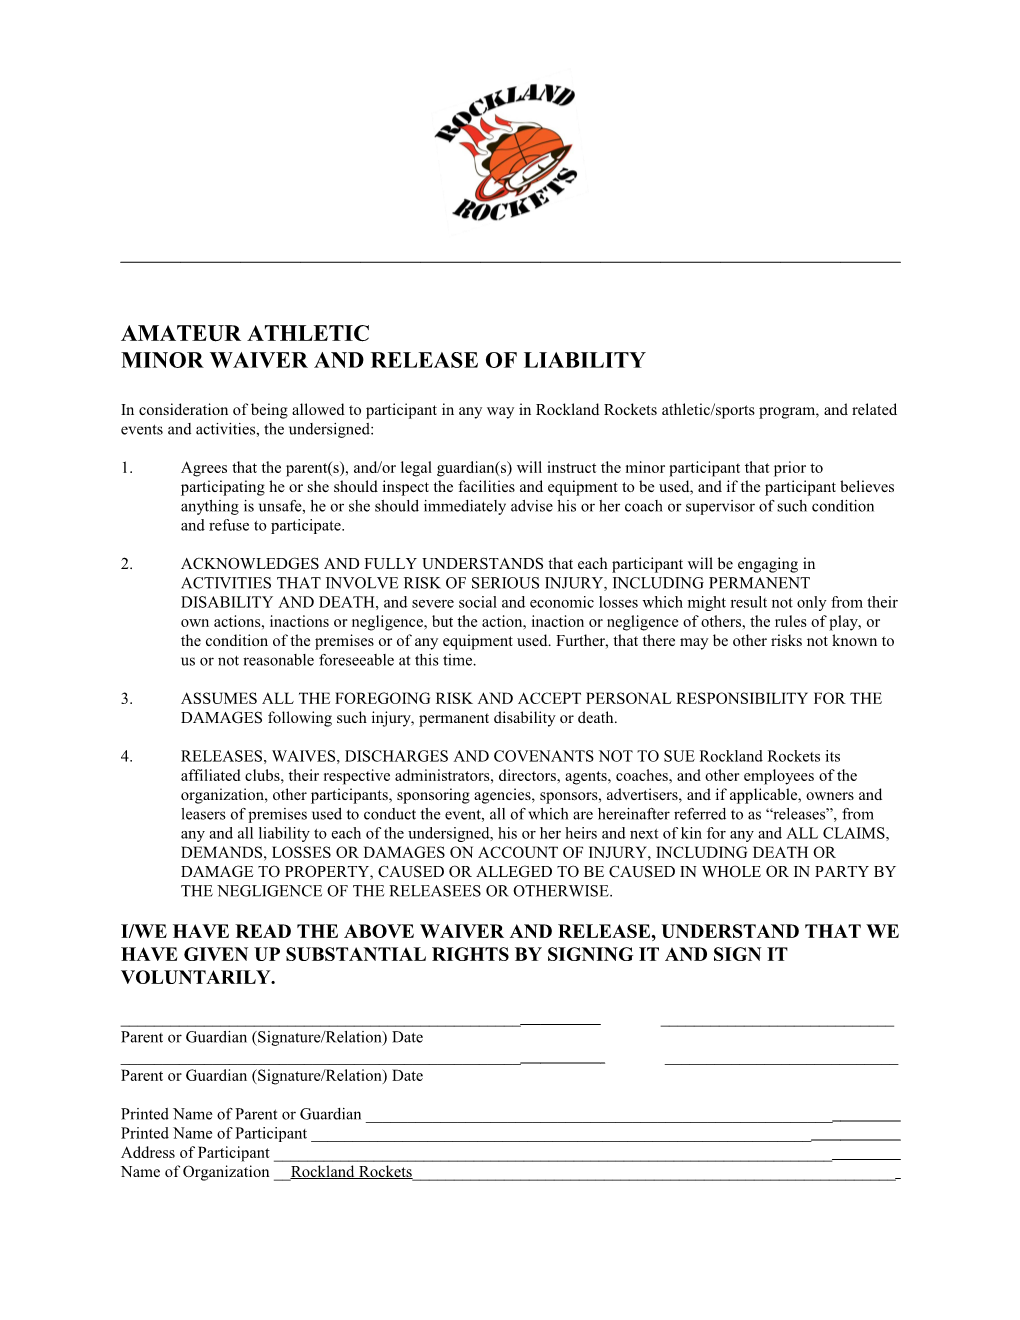 Minor Waiver and Release of Liability